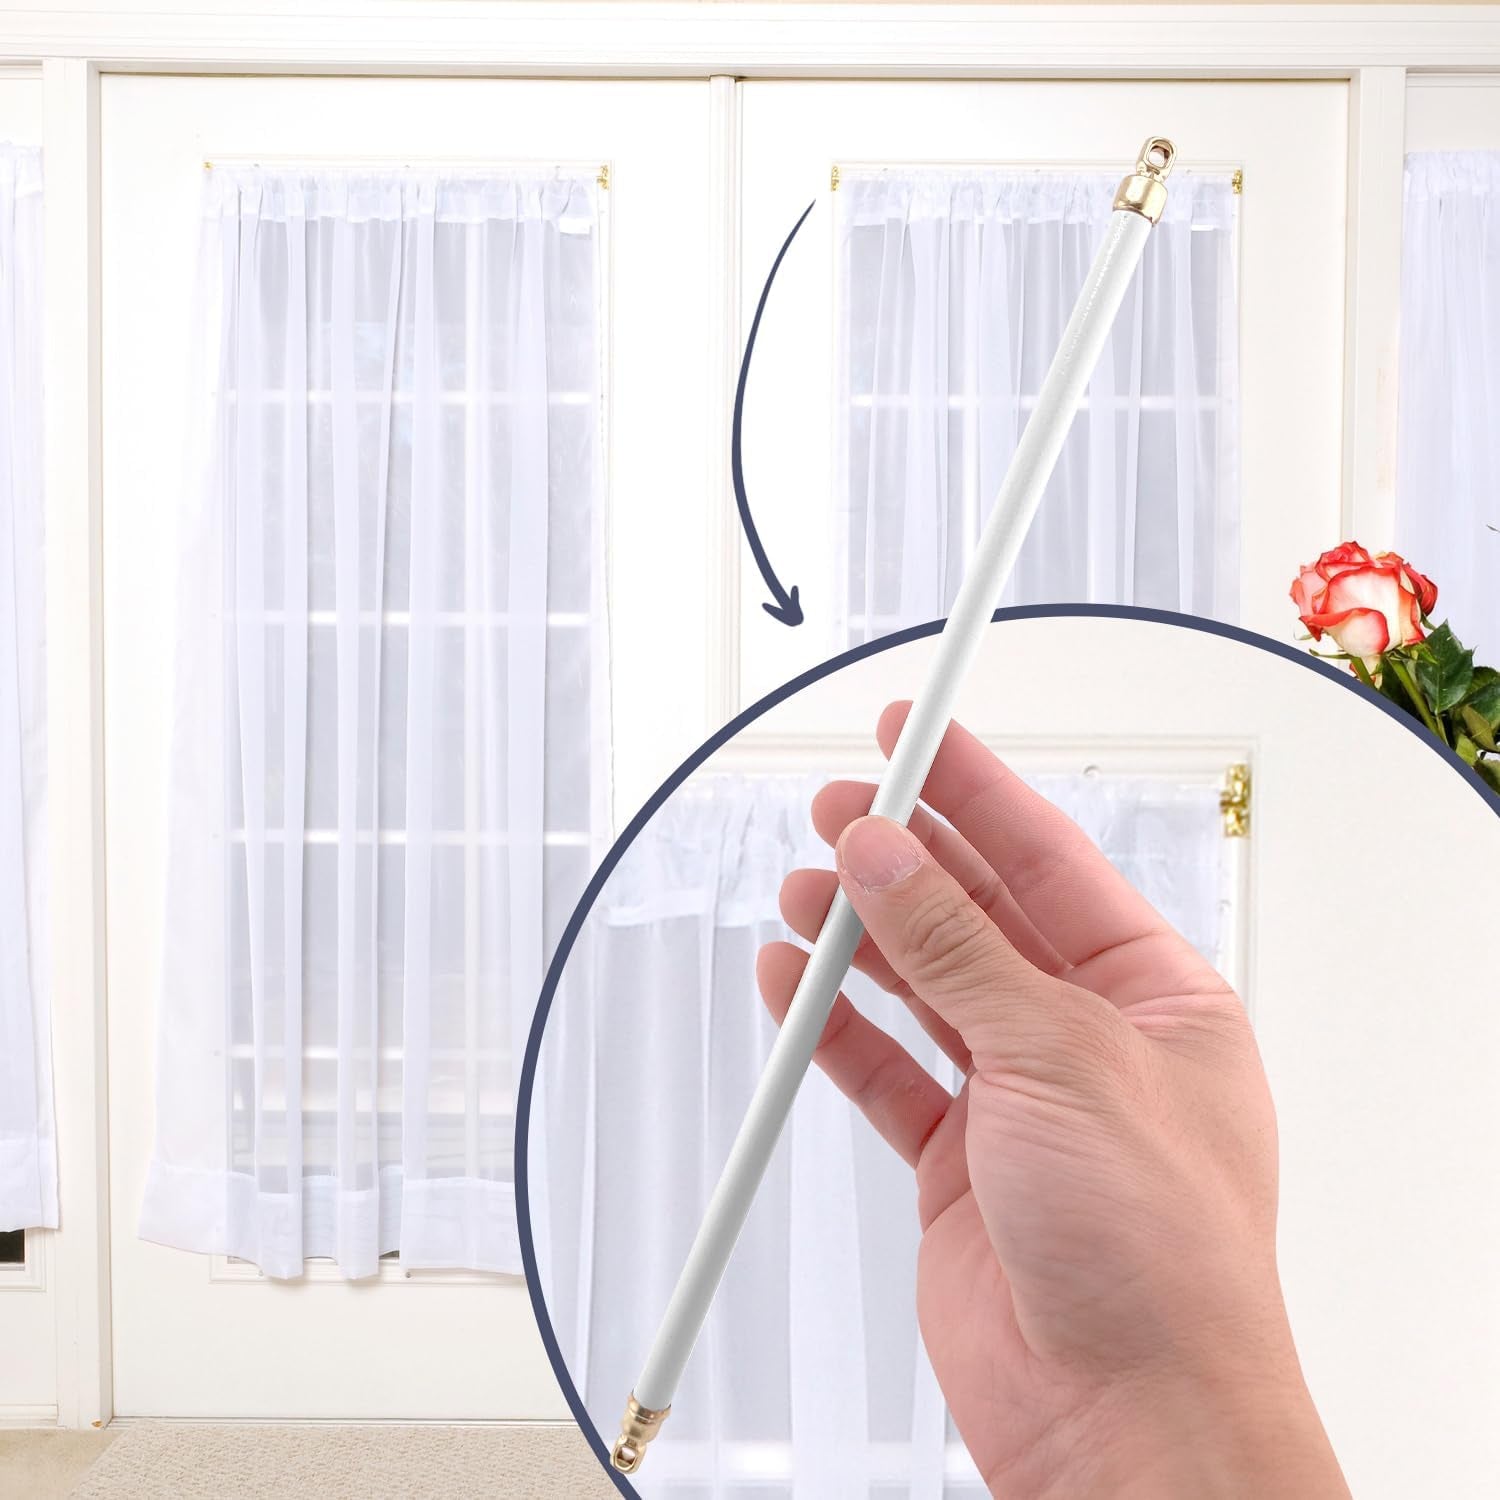 Amazing Drapery Hardware White Swivel Sash Curtain Rods with Brass Ends, Set of 4 (Hardware Included) - Adjustable Length 21-38 Inches, Easy to Install Metal Rods for Doors, Windows, and Sidelights